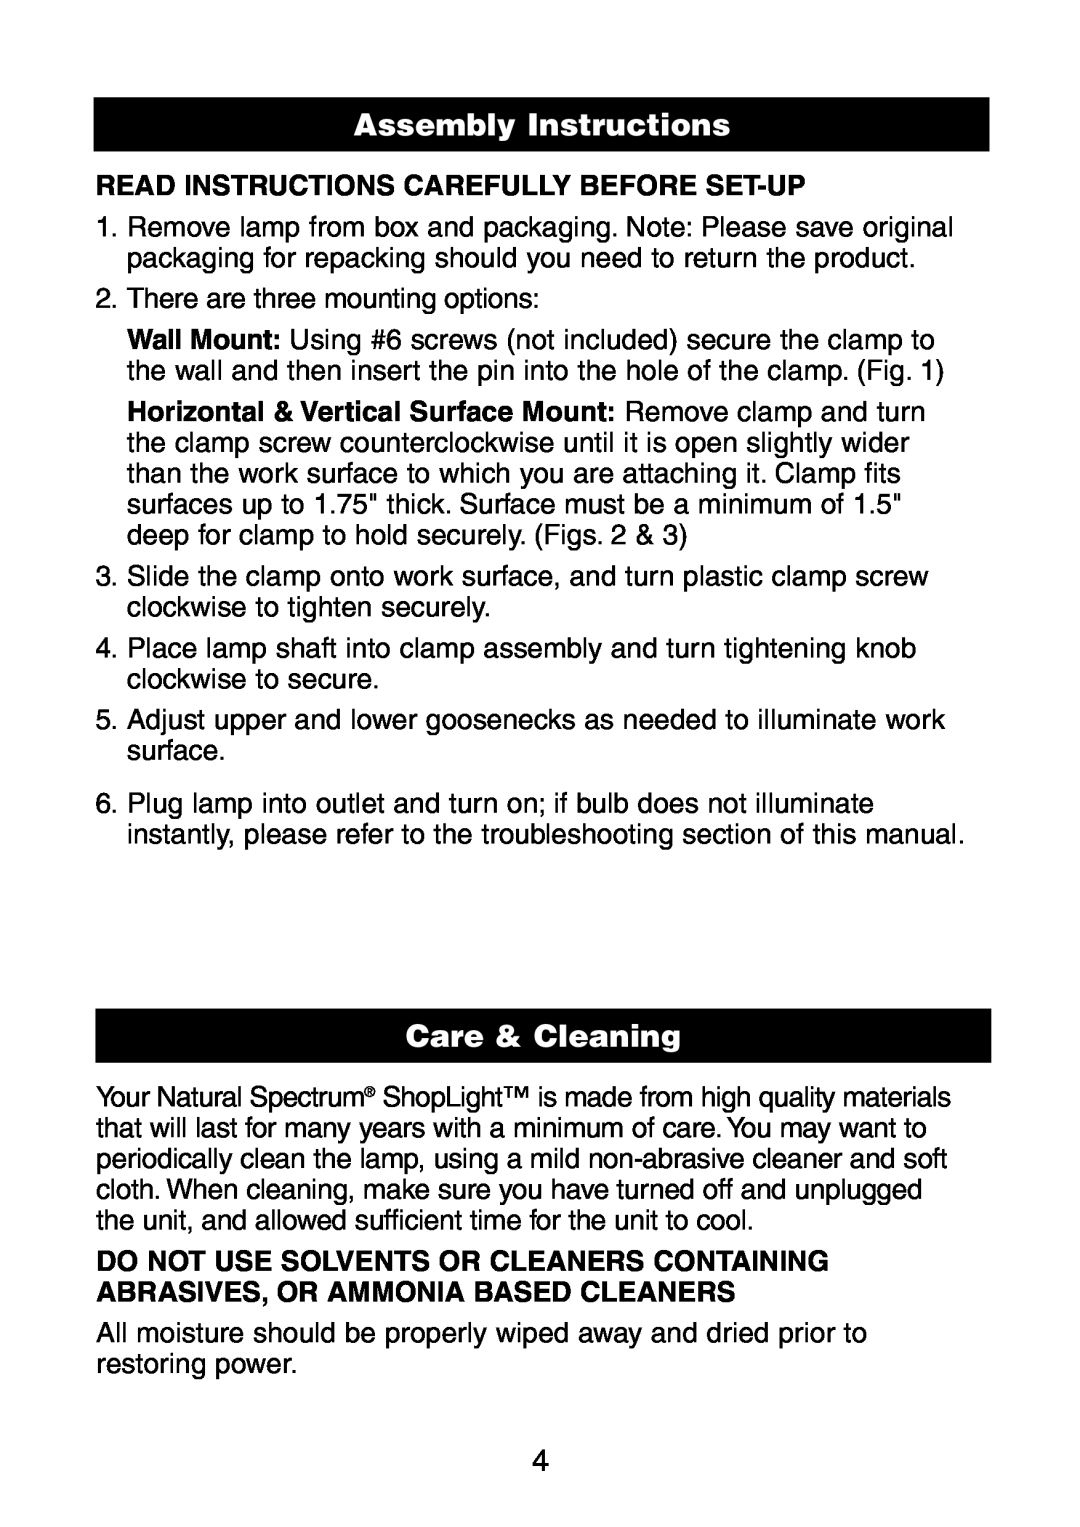 Verilux VC01HH1 instruction manual Assembly Instructions, Care & Cleaning, Read Instructions Carefully Before Set-Up 